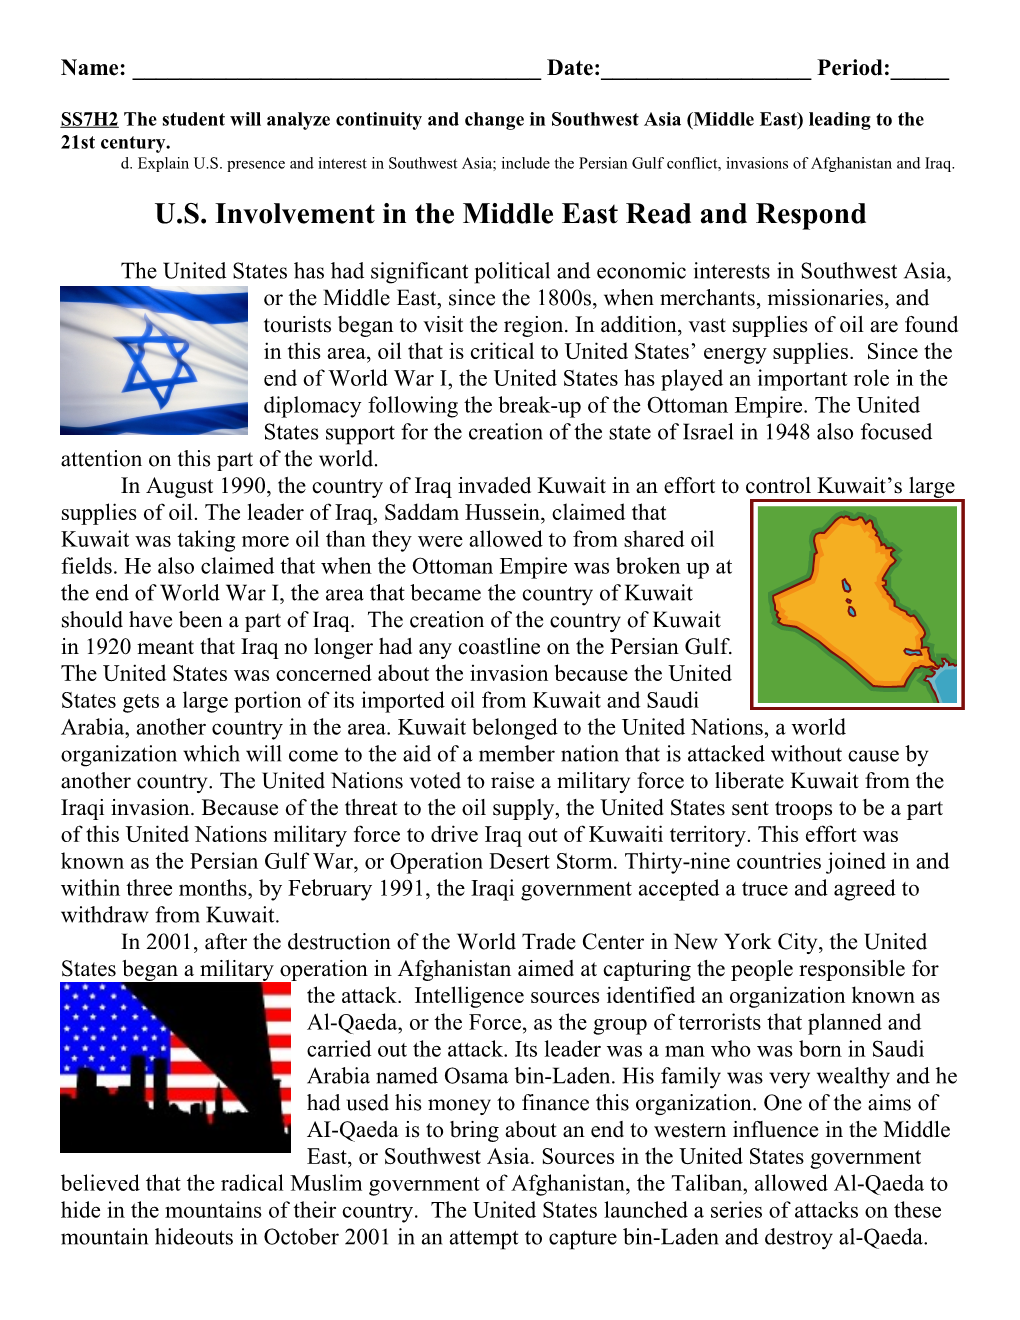 U.S. Involvement in the Middle East Read and Respond